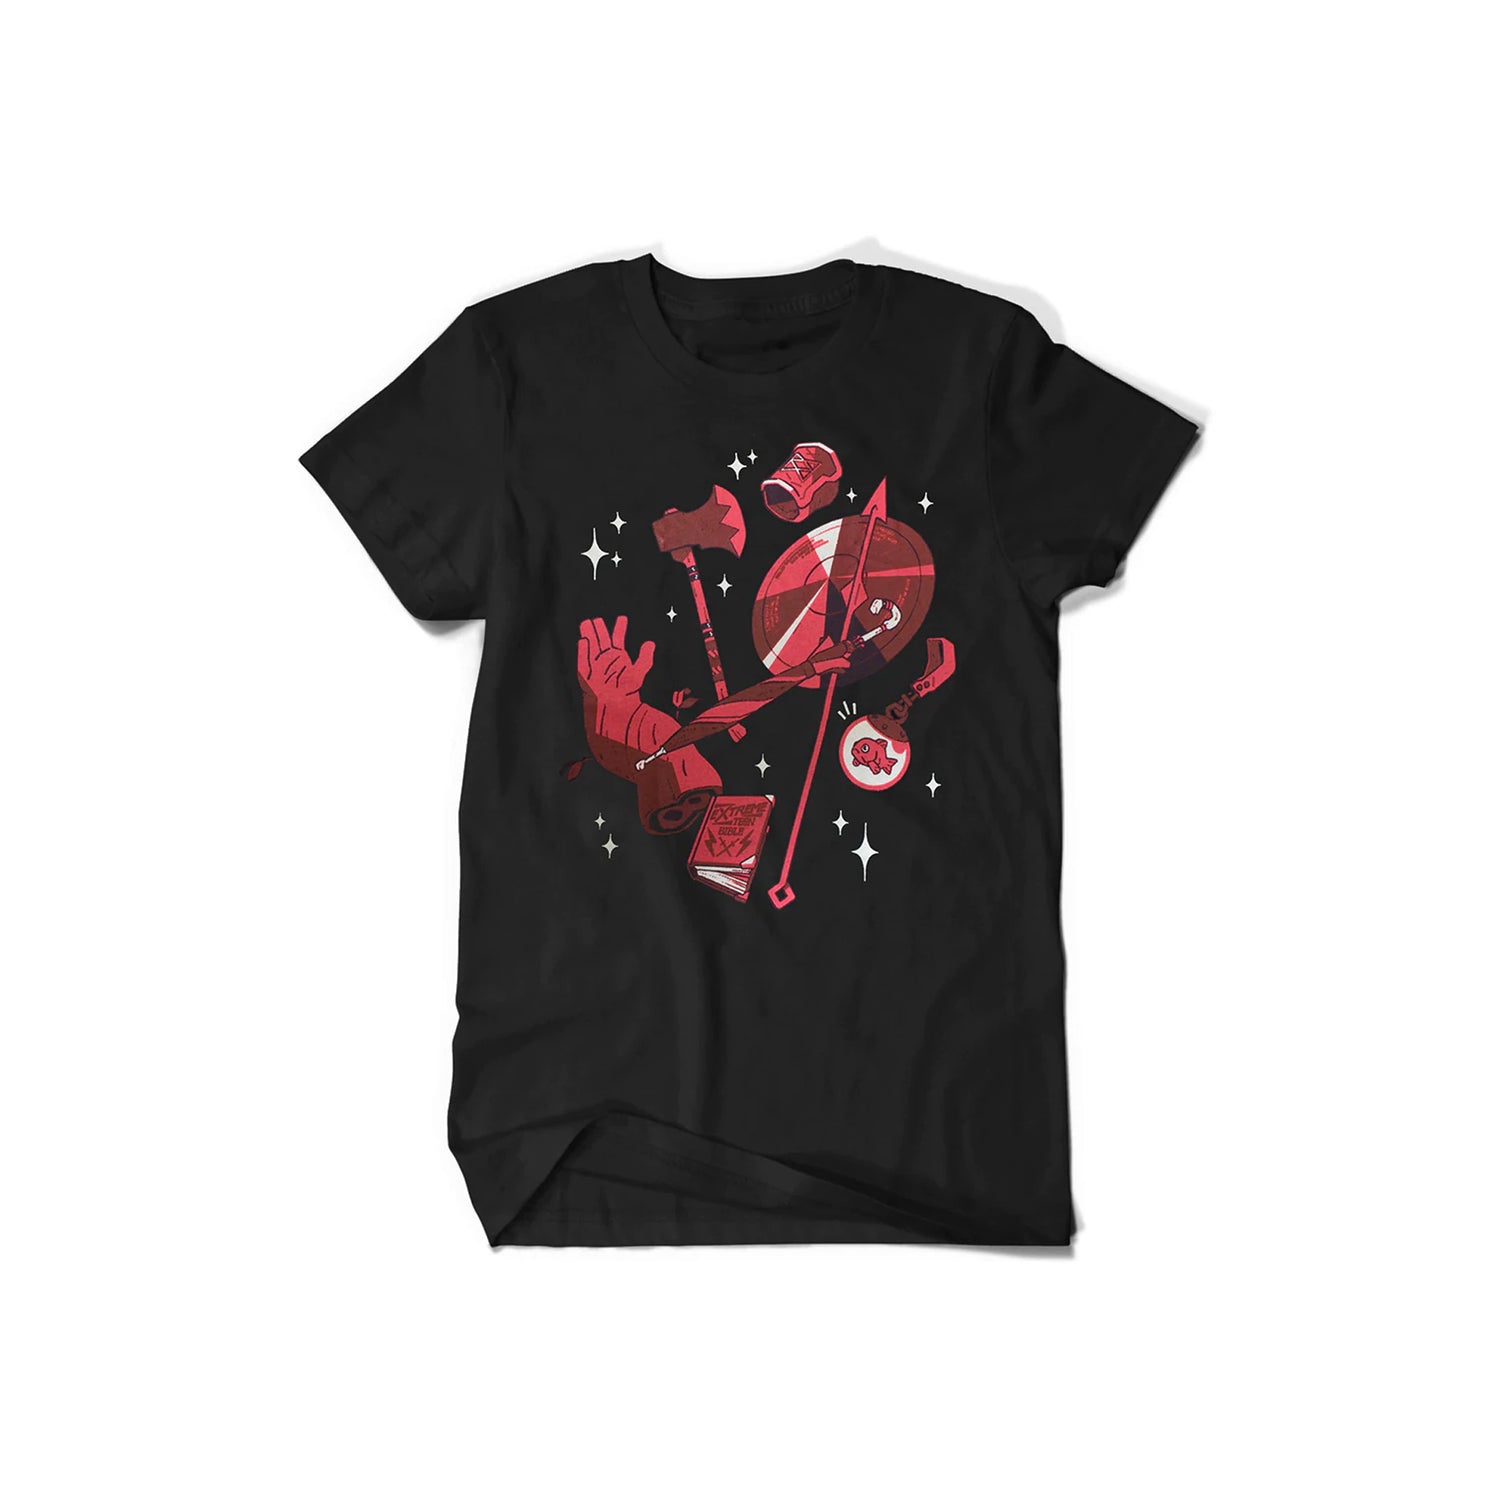 A black tee-shirt with red and maroon illustrations on it. There's a wooden arm, an ax, and umbrella, a bracer, a shield, a spear, a book, and a goldfish in a small glass attached to a strap.